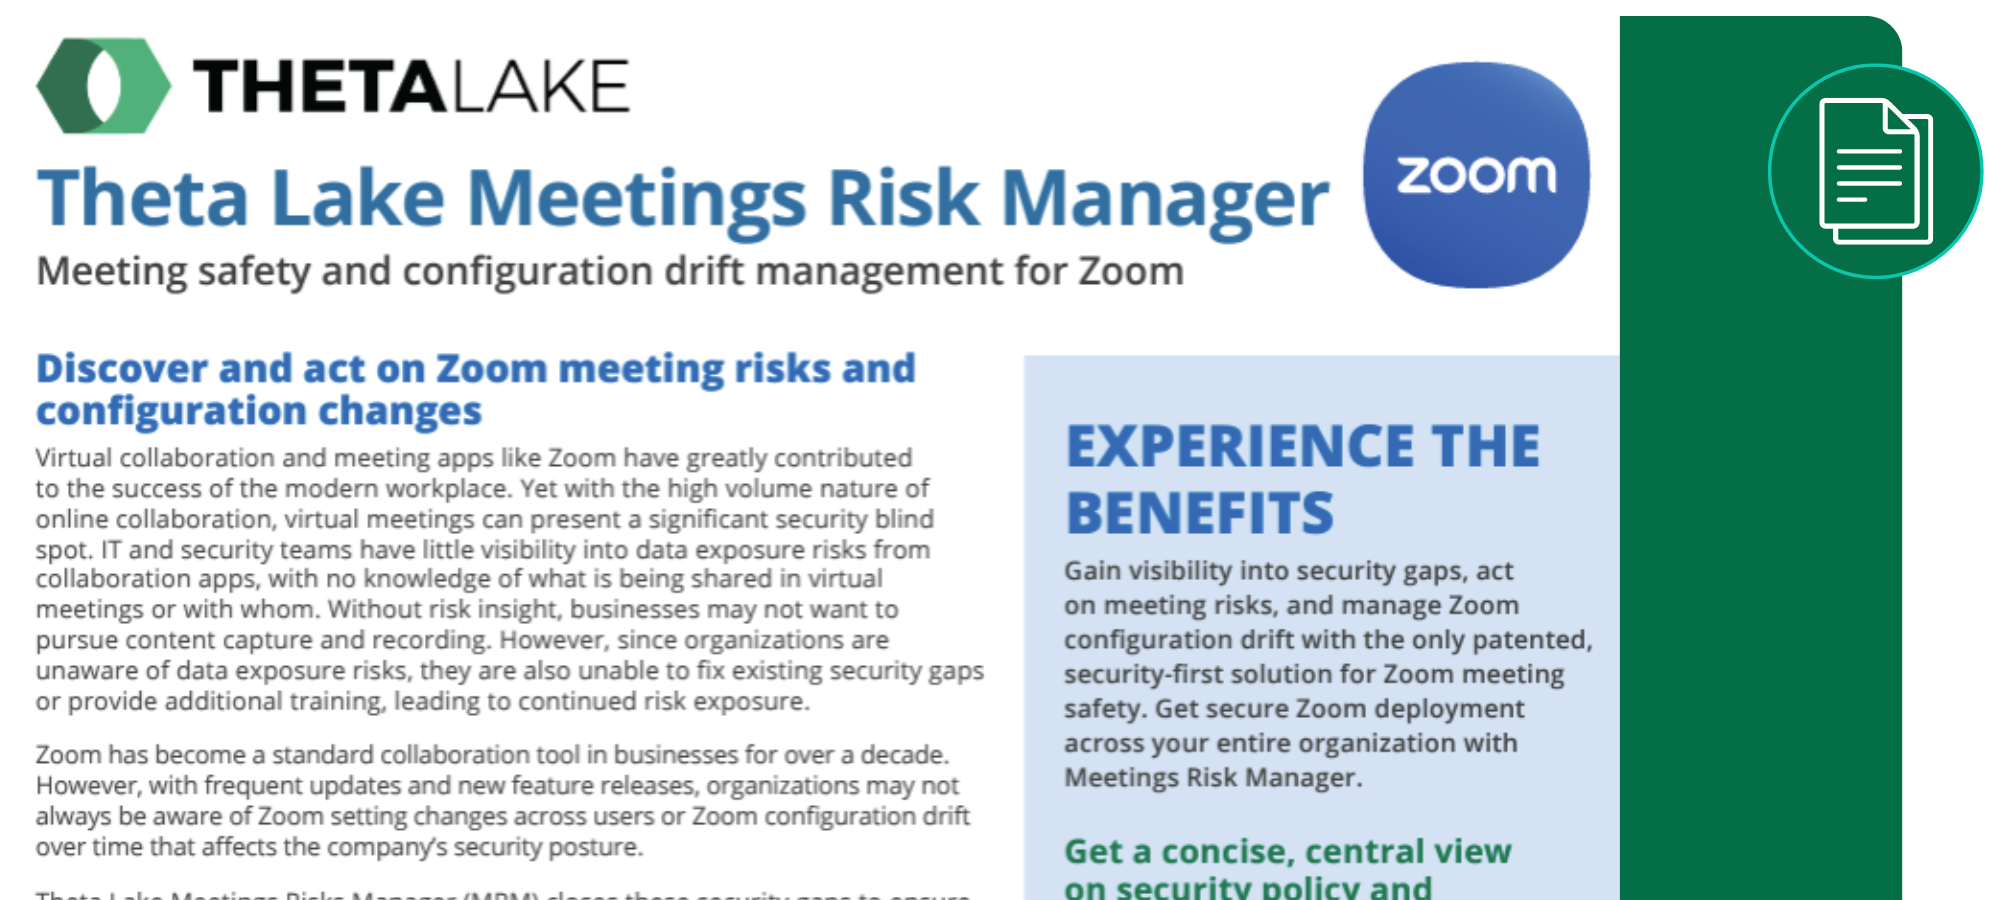 SolutionBrief MeetingsRiskManager ThetaLake and Zoom 2023